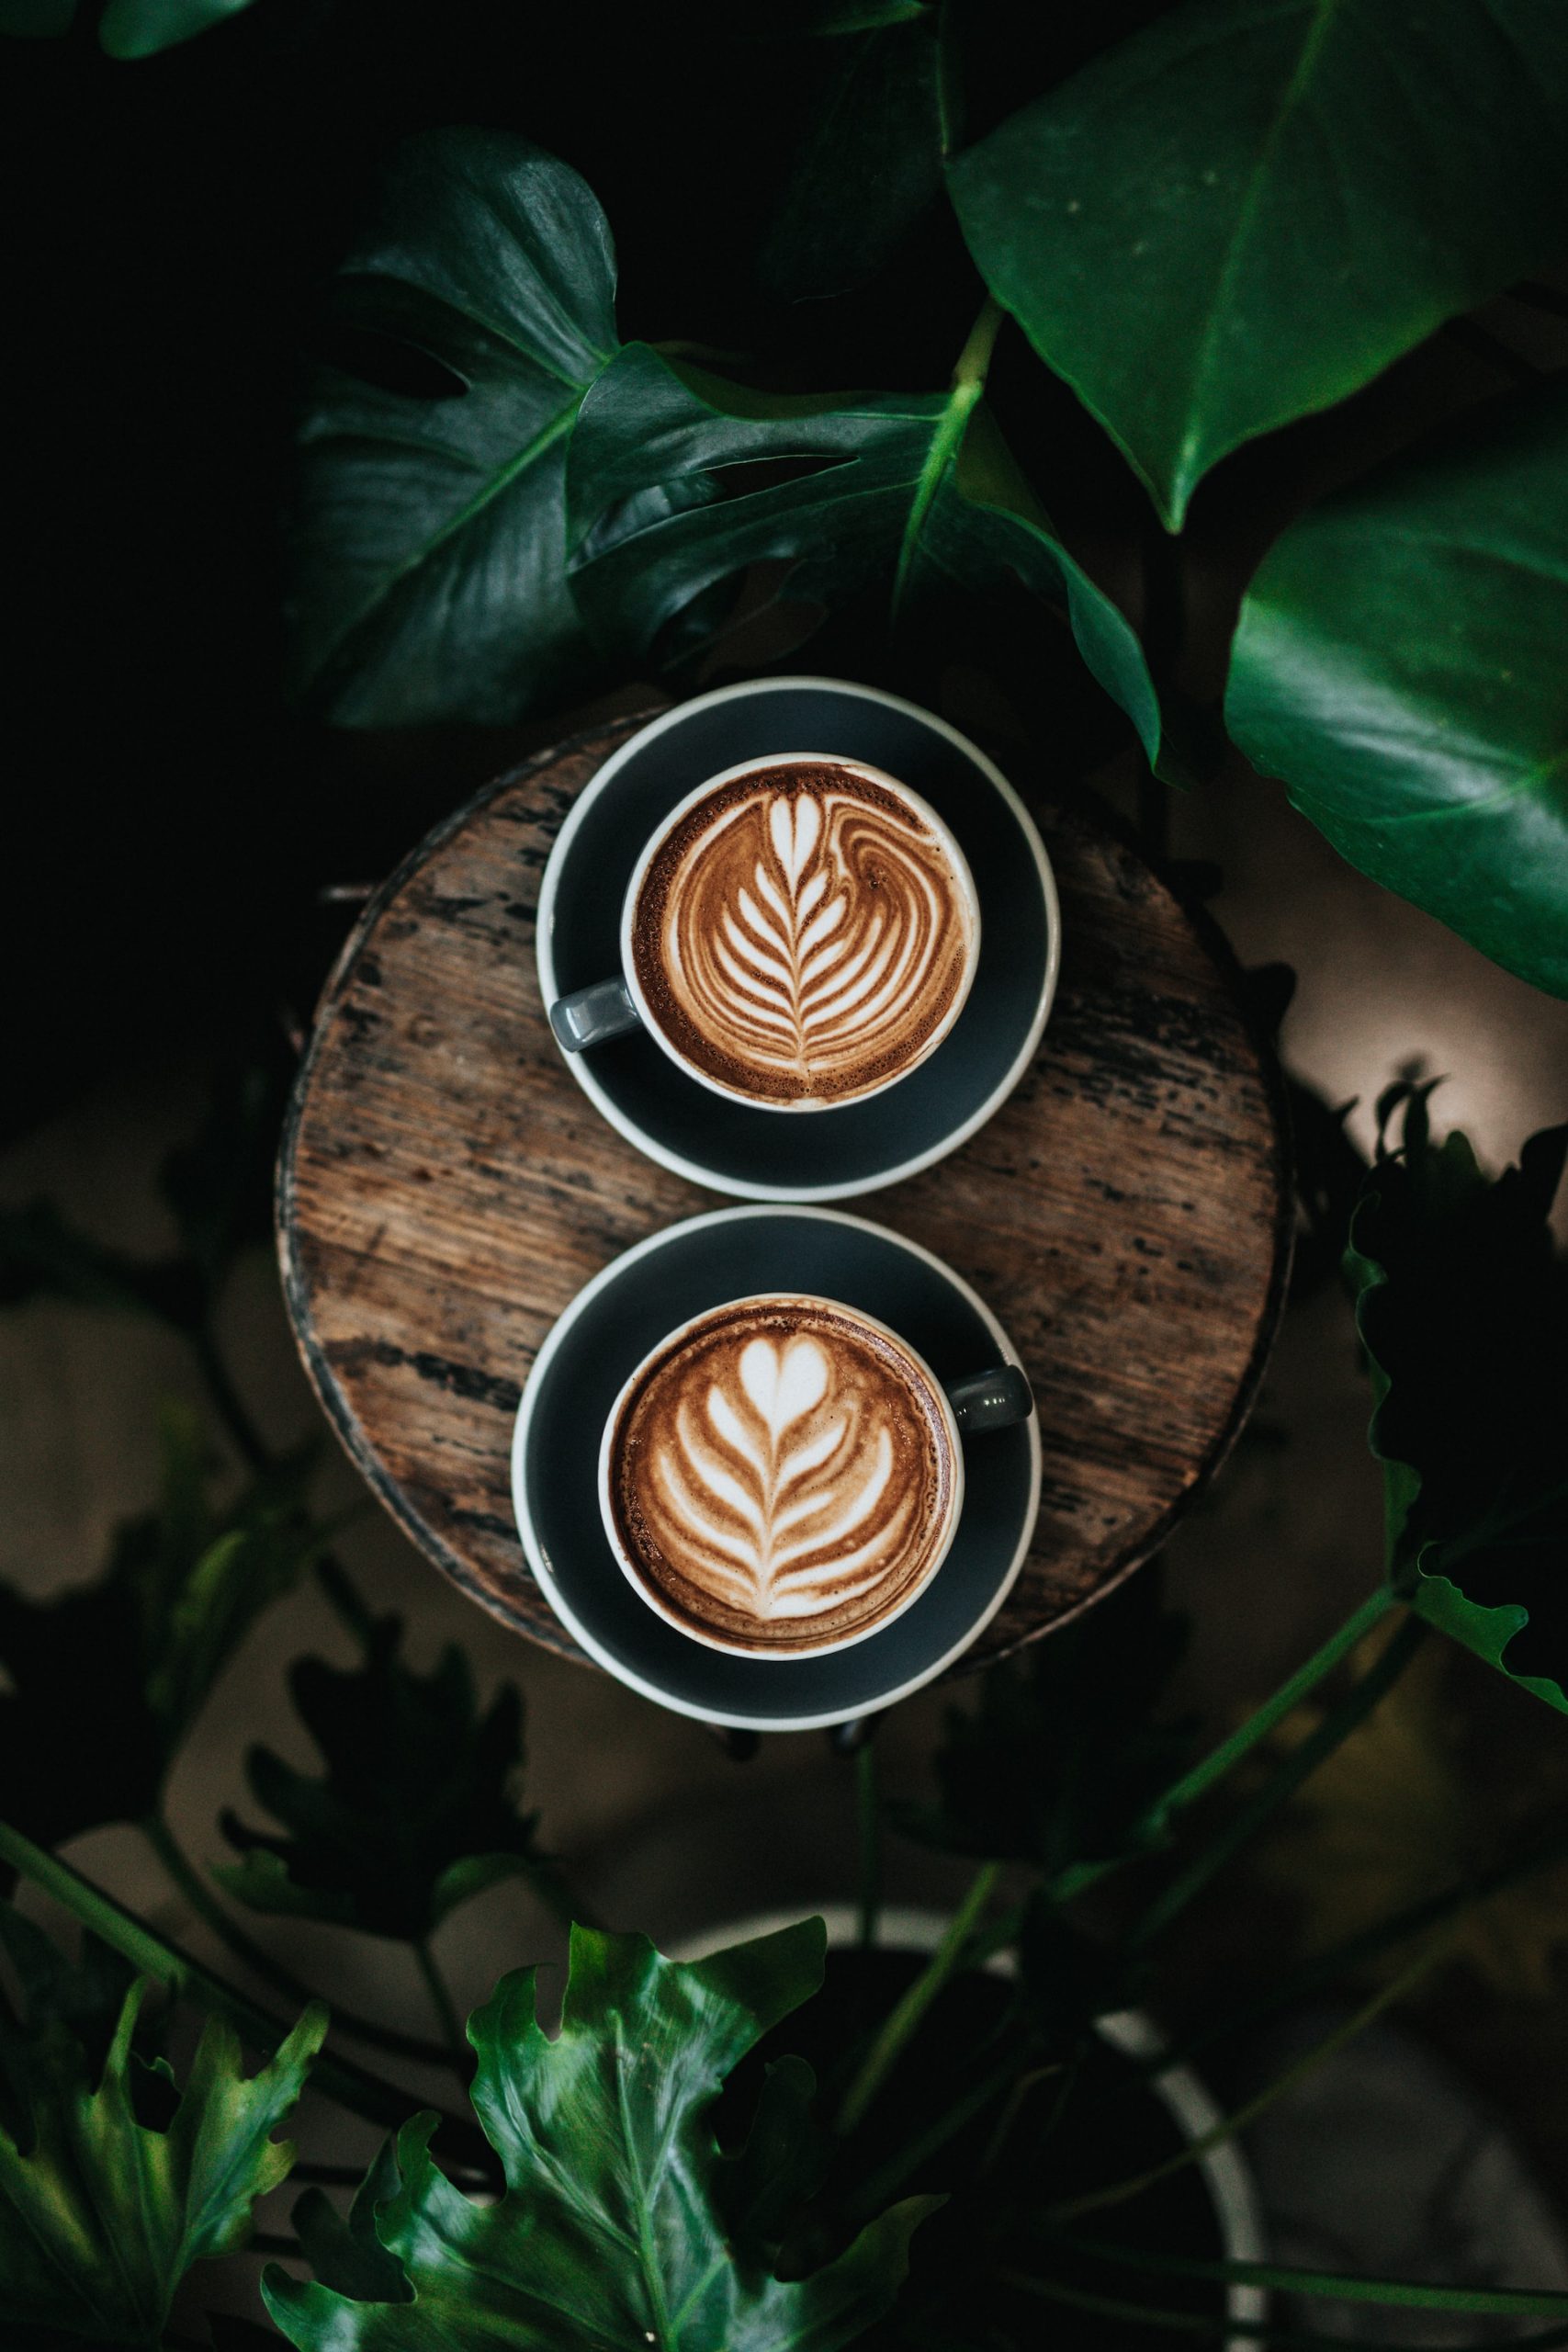 Aerial view of two lattes sitting on a wooden table surrounded by green plant leaves